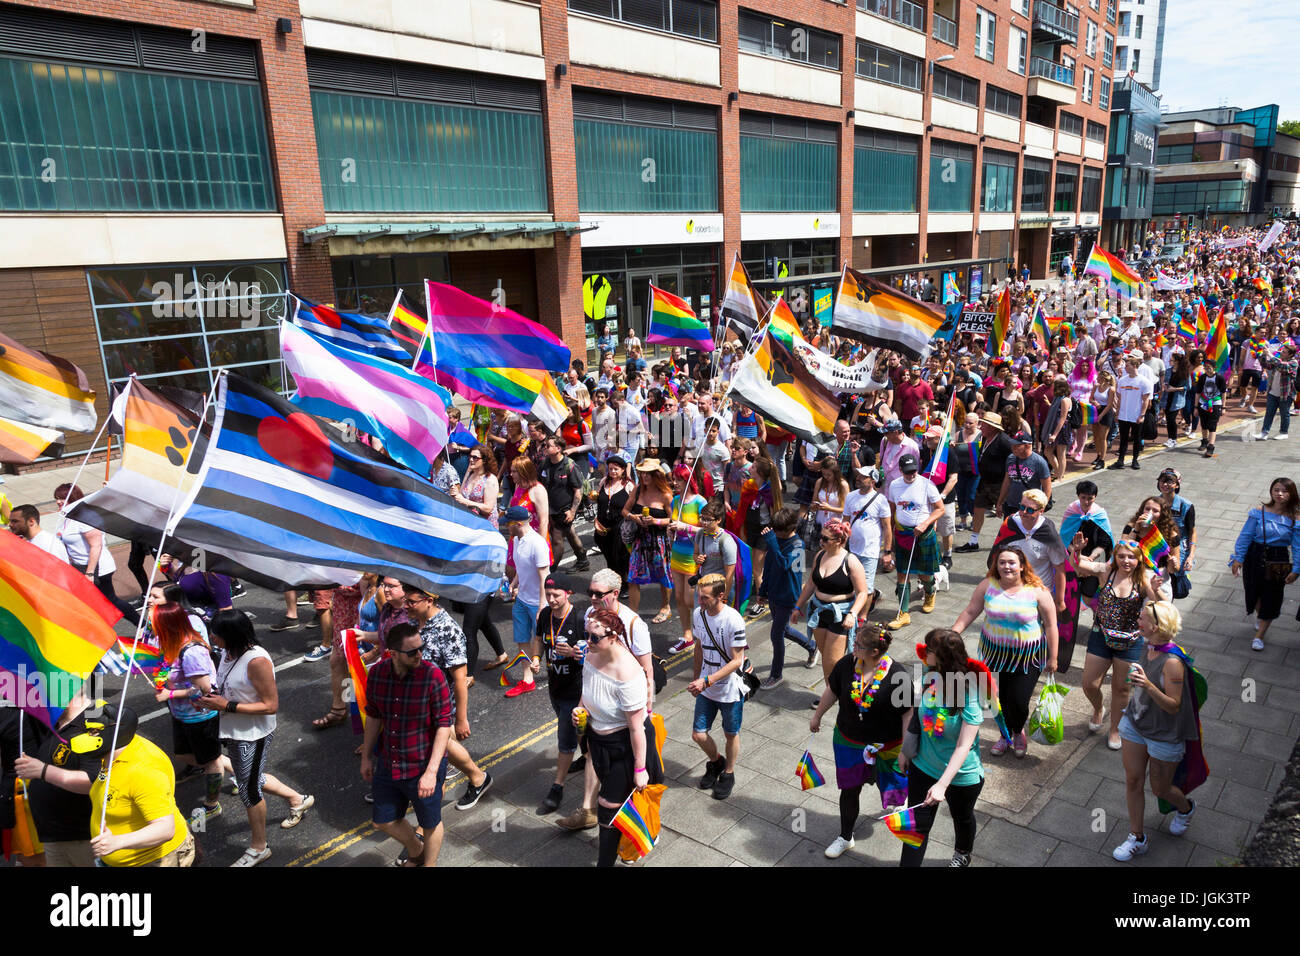 Bristol, UK. 8th July, 2017. Participants in a parade through the city center as part of the Bristol Pride Festival. Credit: Elizabeth Nunn/Alamy Live News. Stock Photo